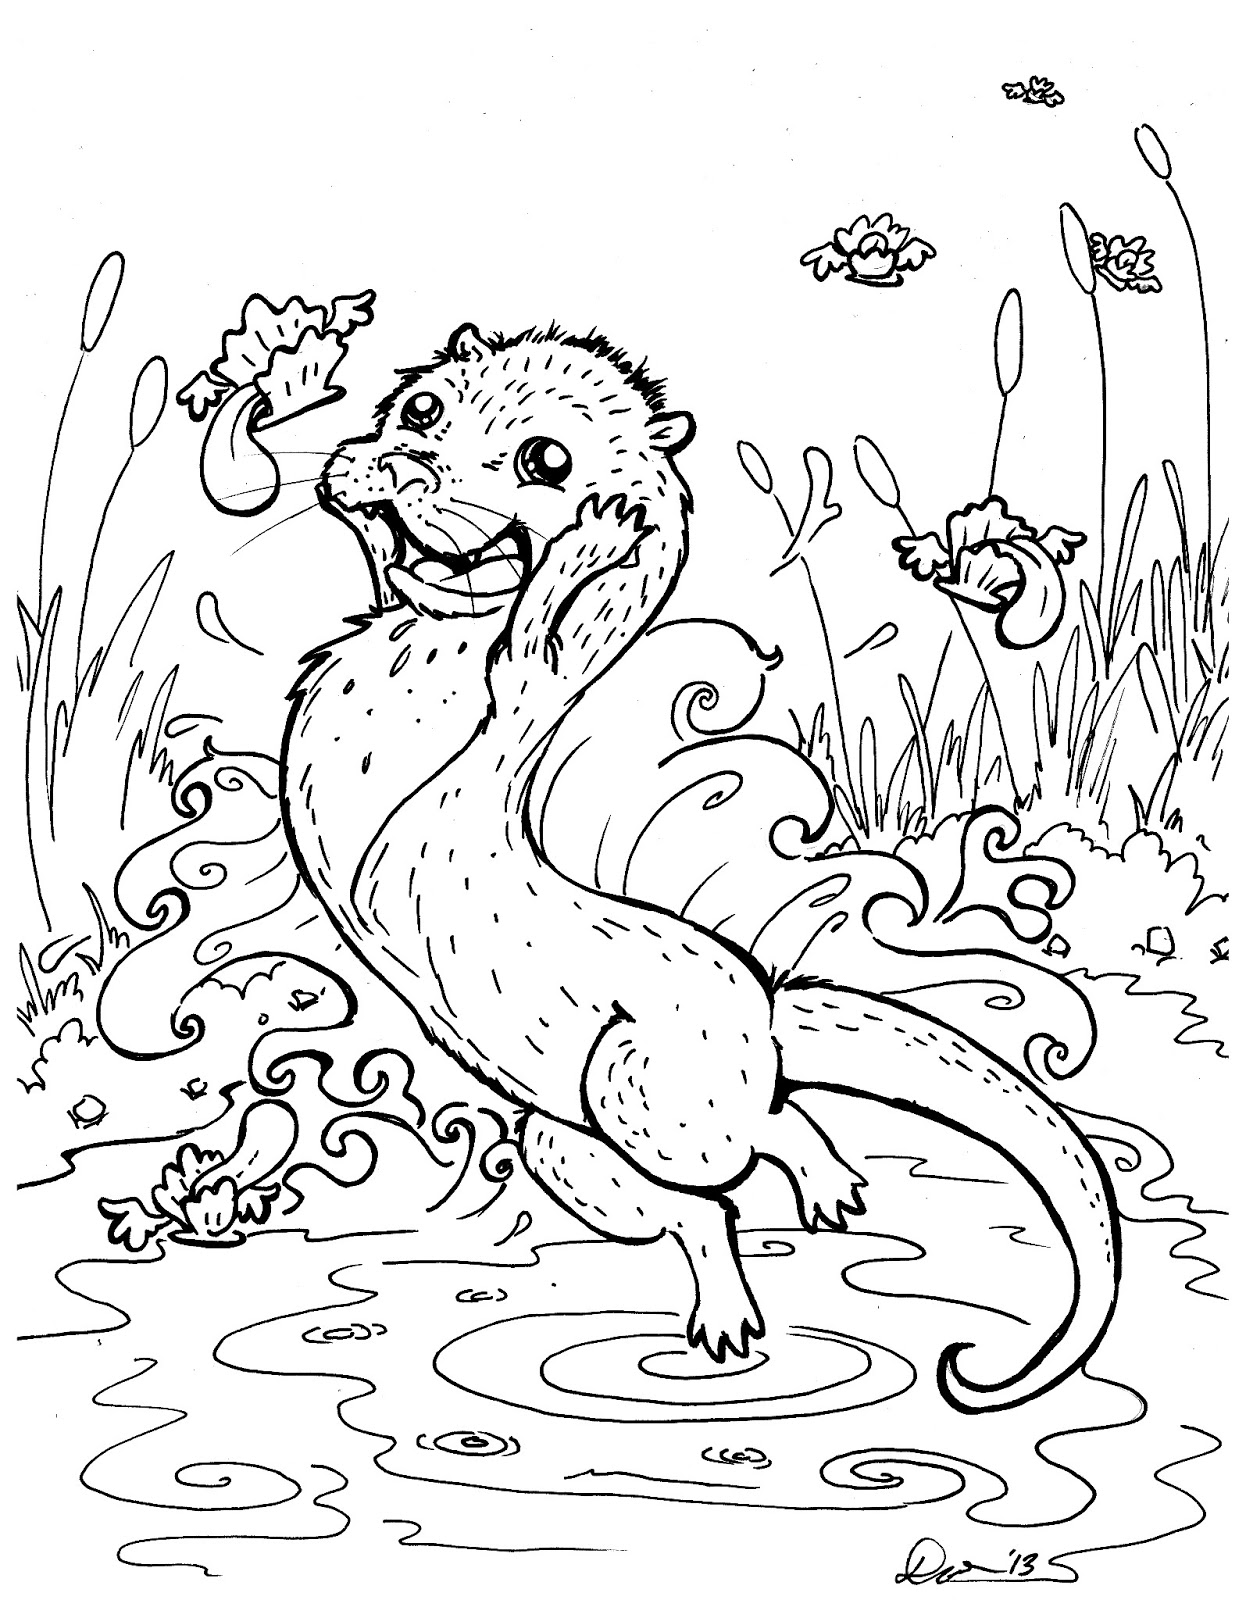 Sea Otter Coloring Pages